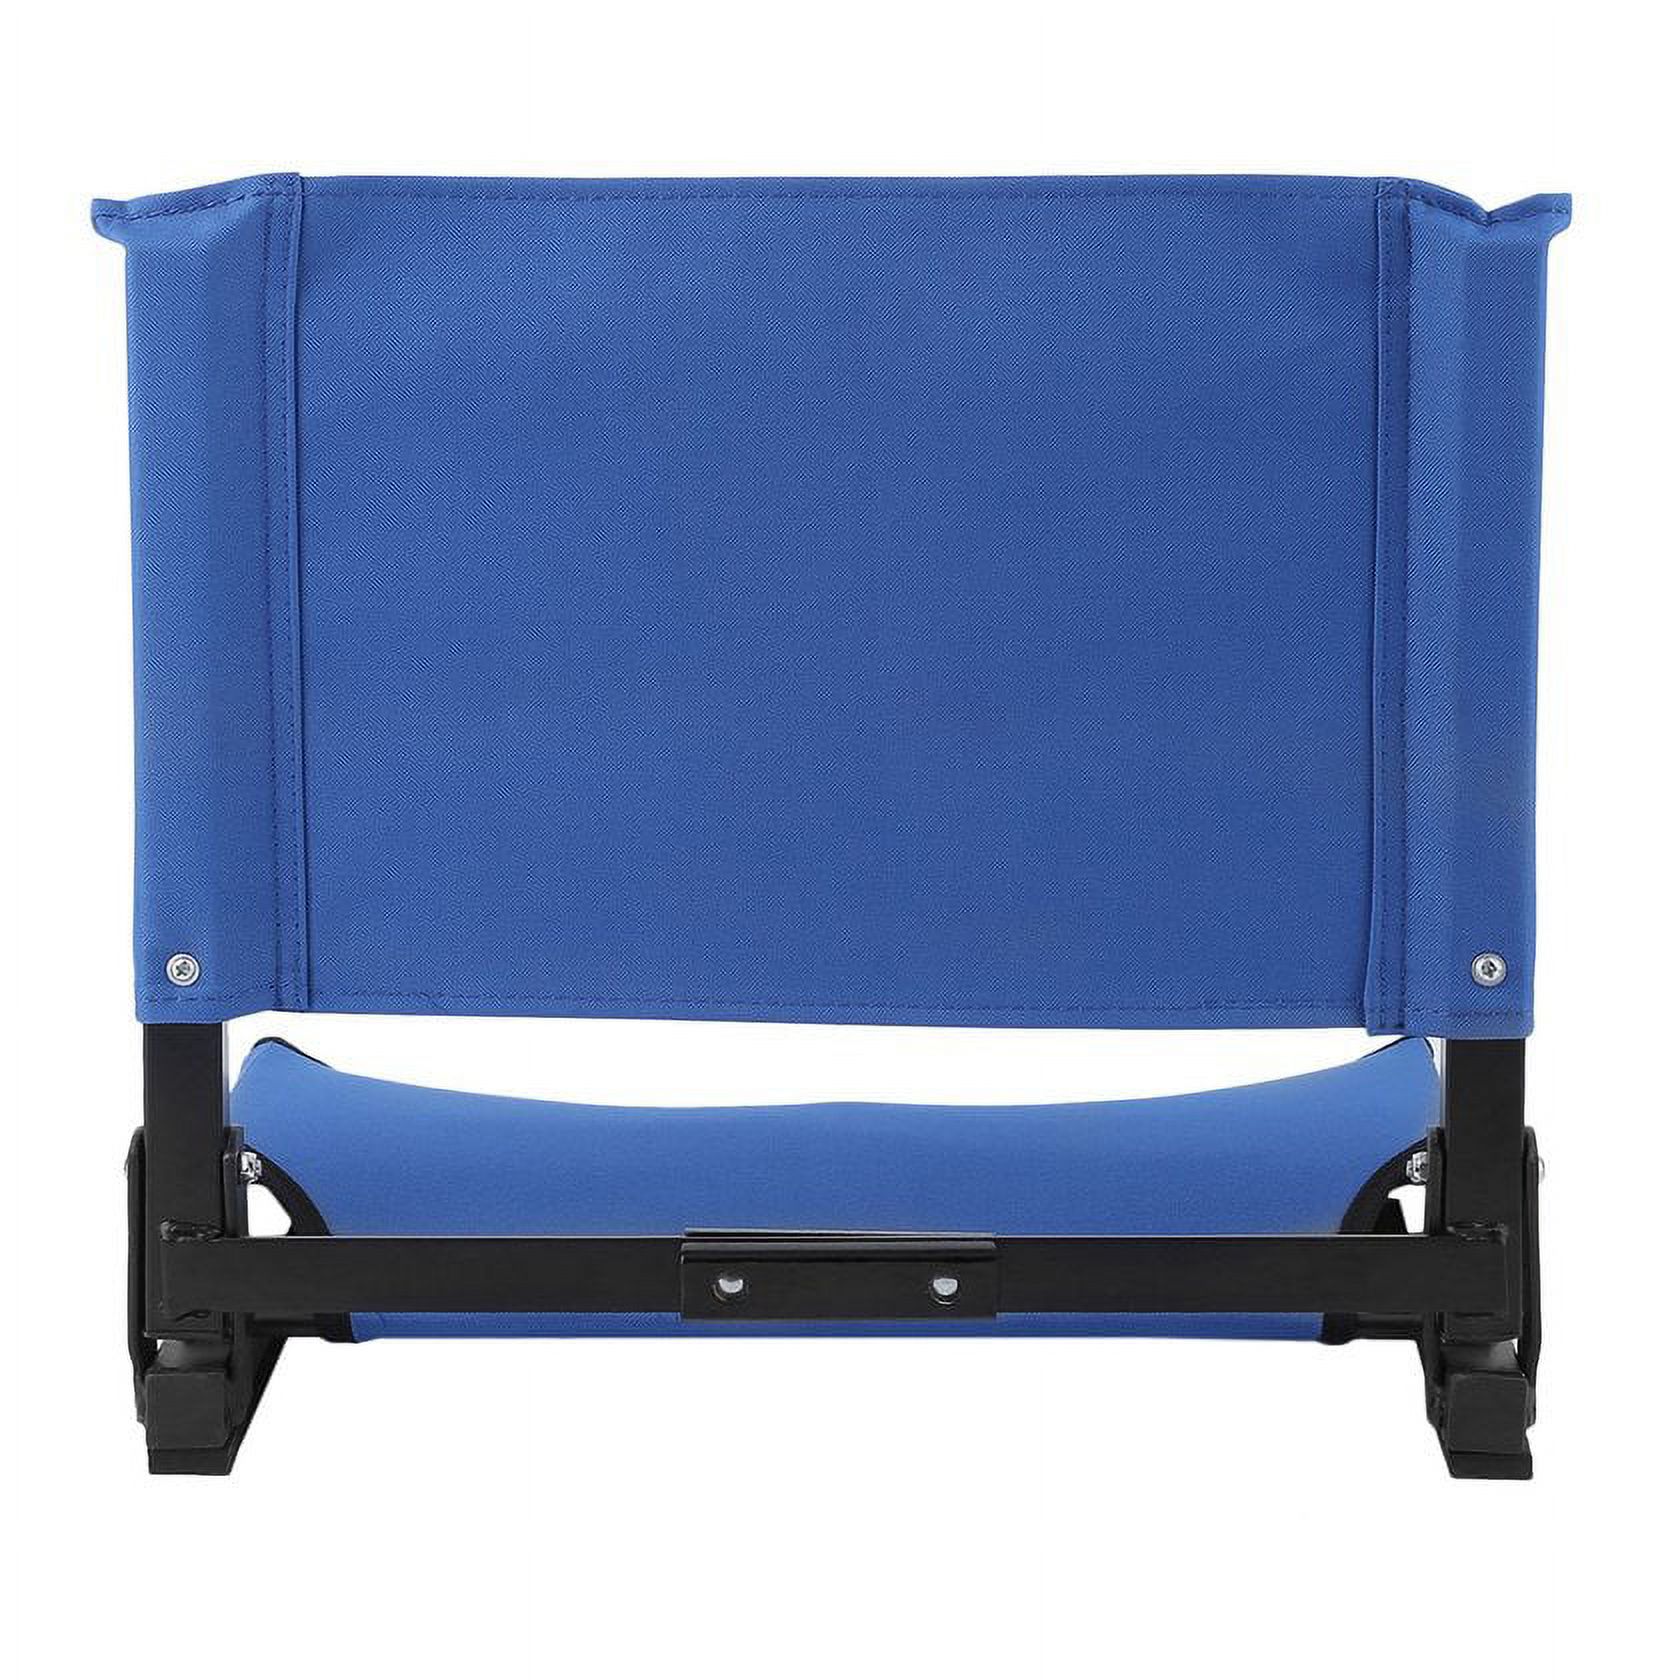 Bleacher Seats With Backs And Cushion，Folding Portable Stadium Bleacher Cushion Chair Durable Padded Seat With Back - image 3 of 7